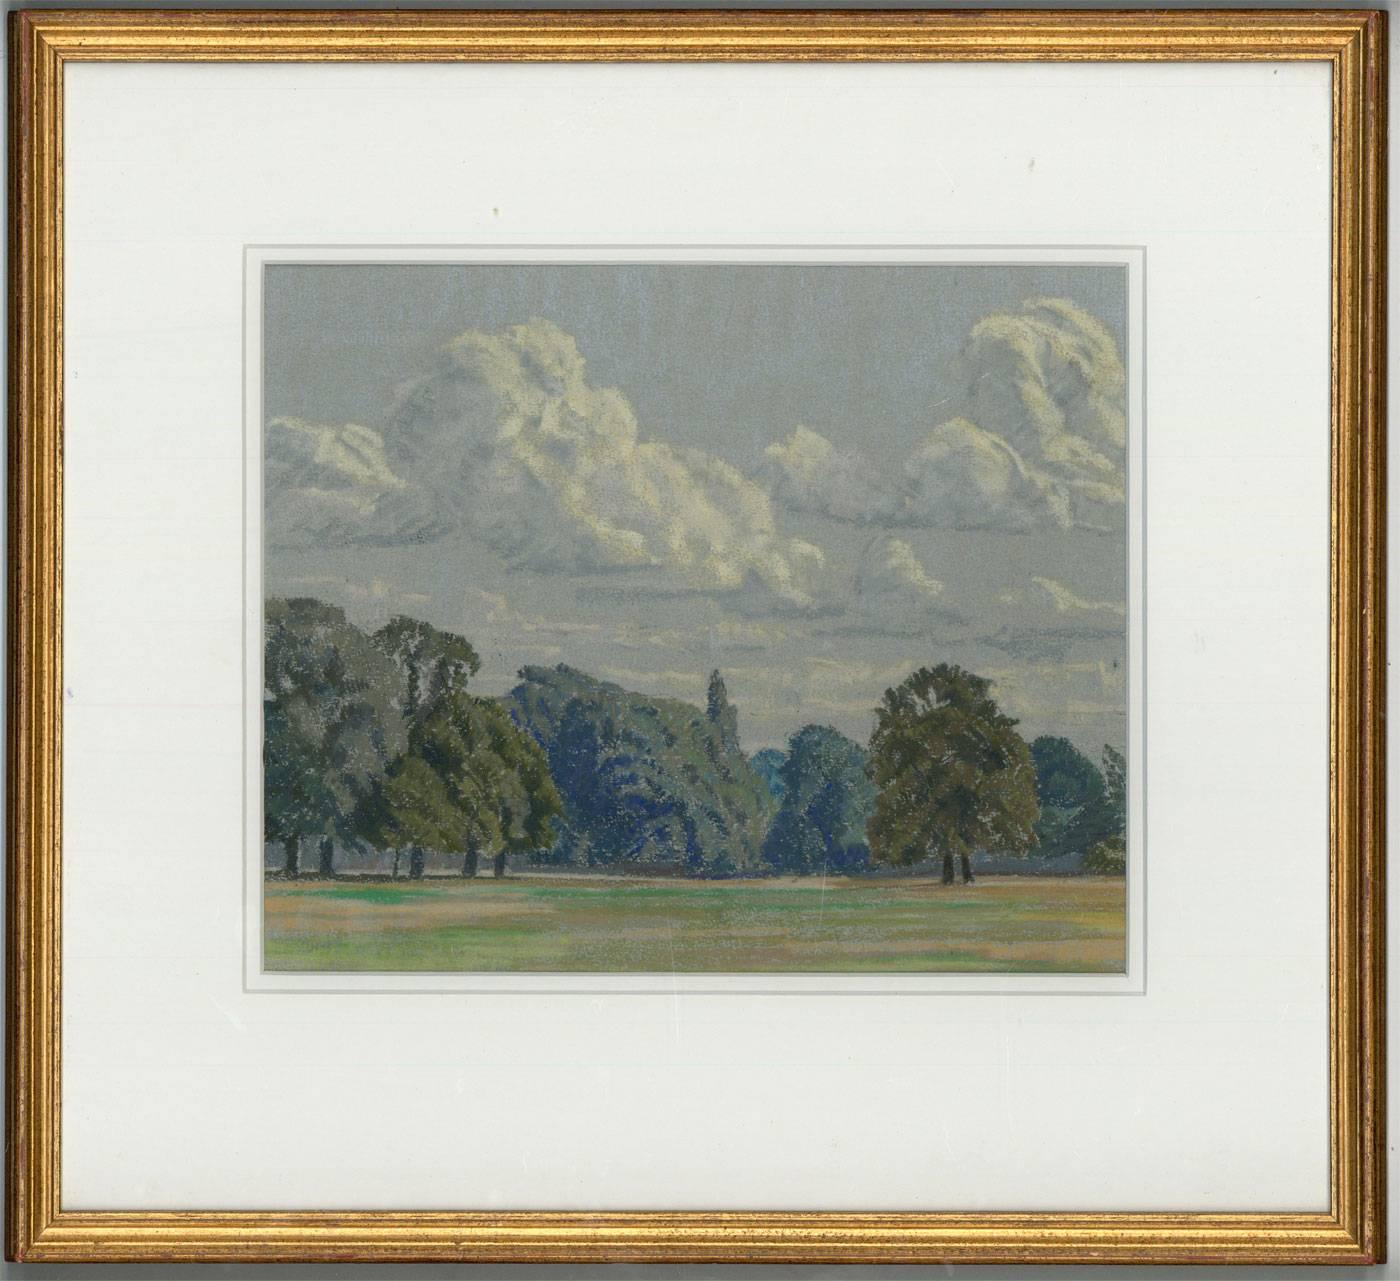 A mid-late signed 20th century pastel depicting a woodland landscape by the British artist William Henry Innes (1905 - 1999). Exhibited in 1982 at St. Peter's Gallery, St. Albans, with an old exhibition label affixed verso. Very well presented in a